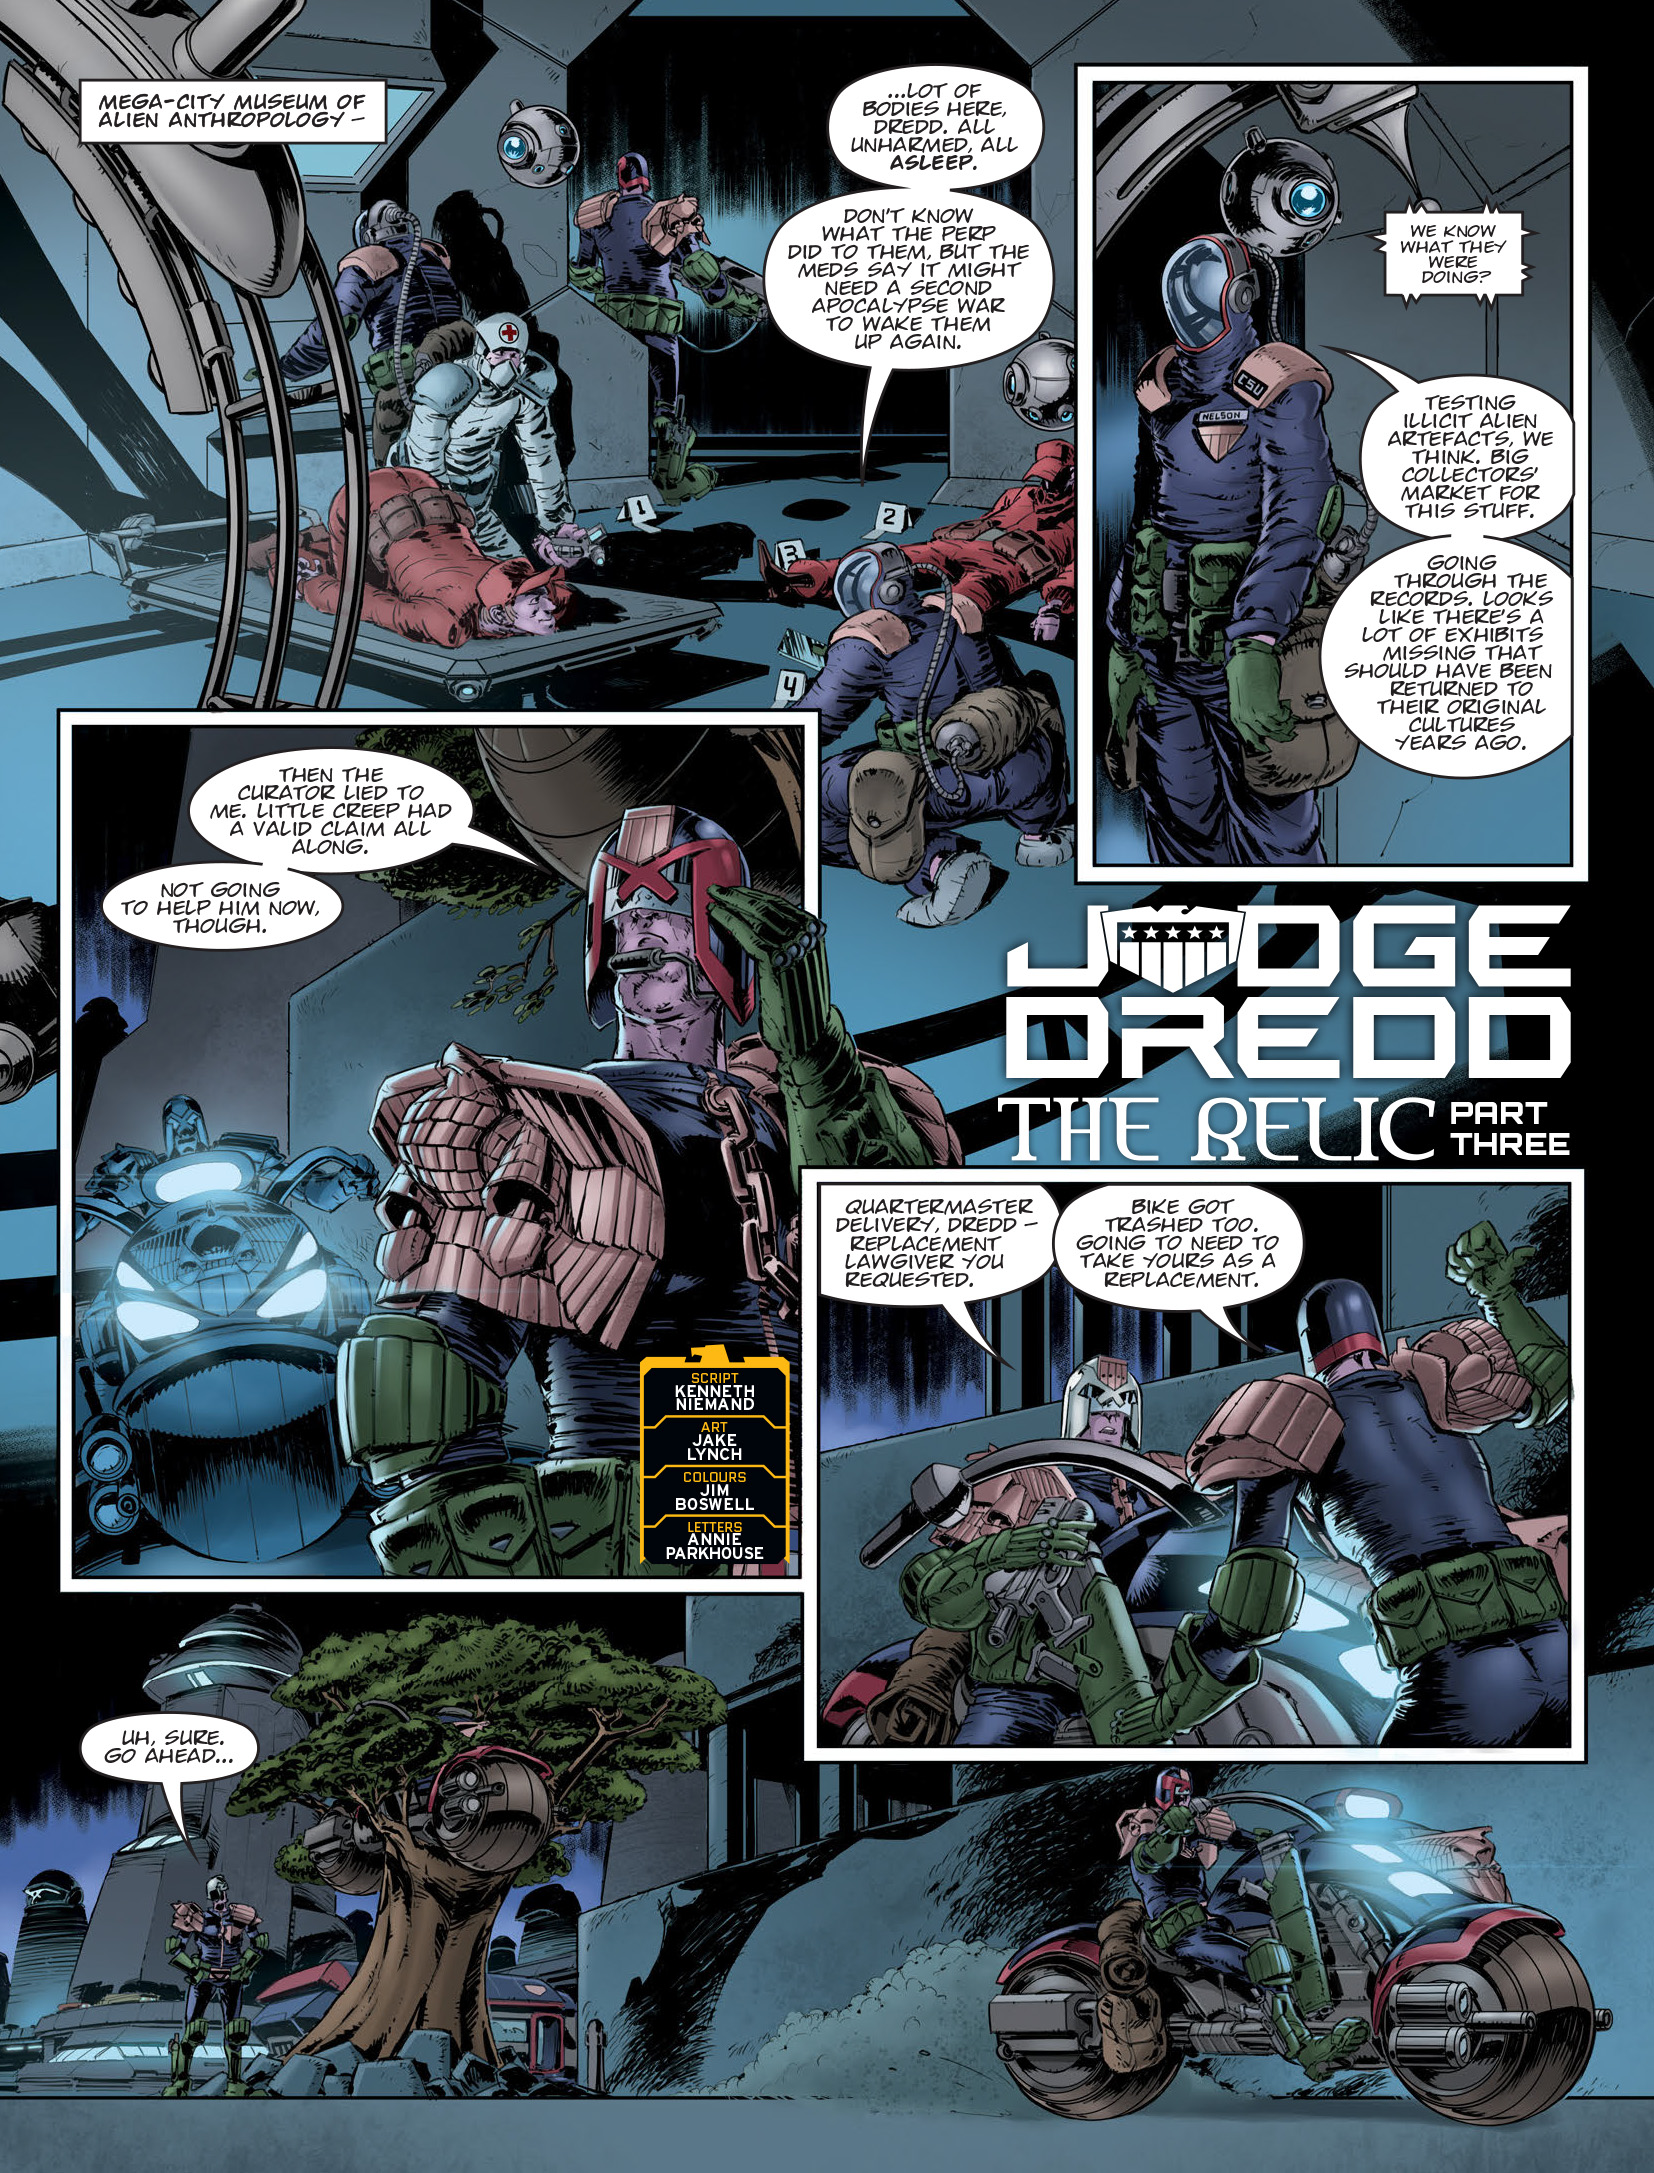 2000 AD: Chapter 2173 - Page 3